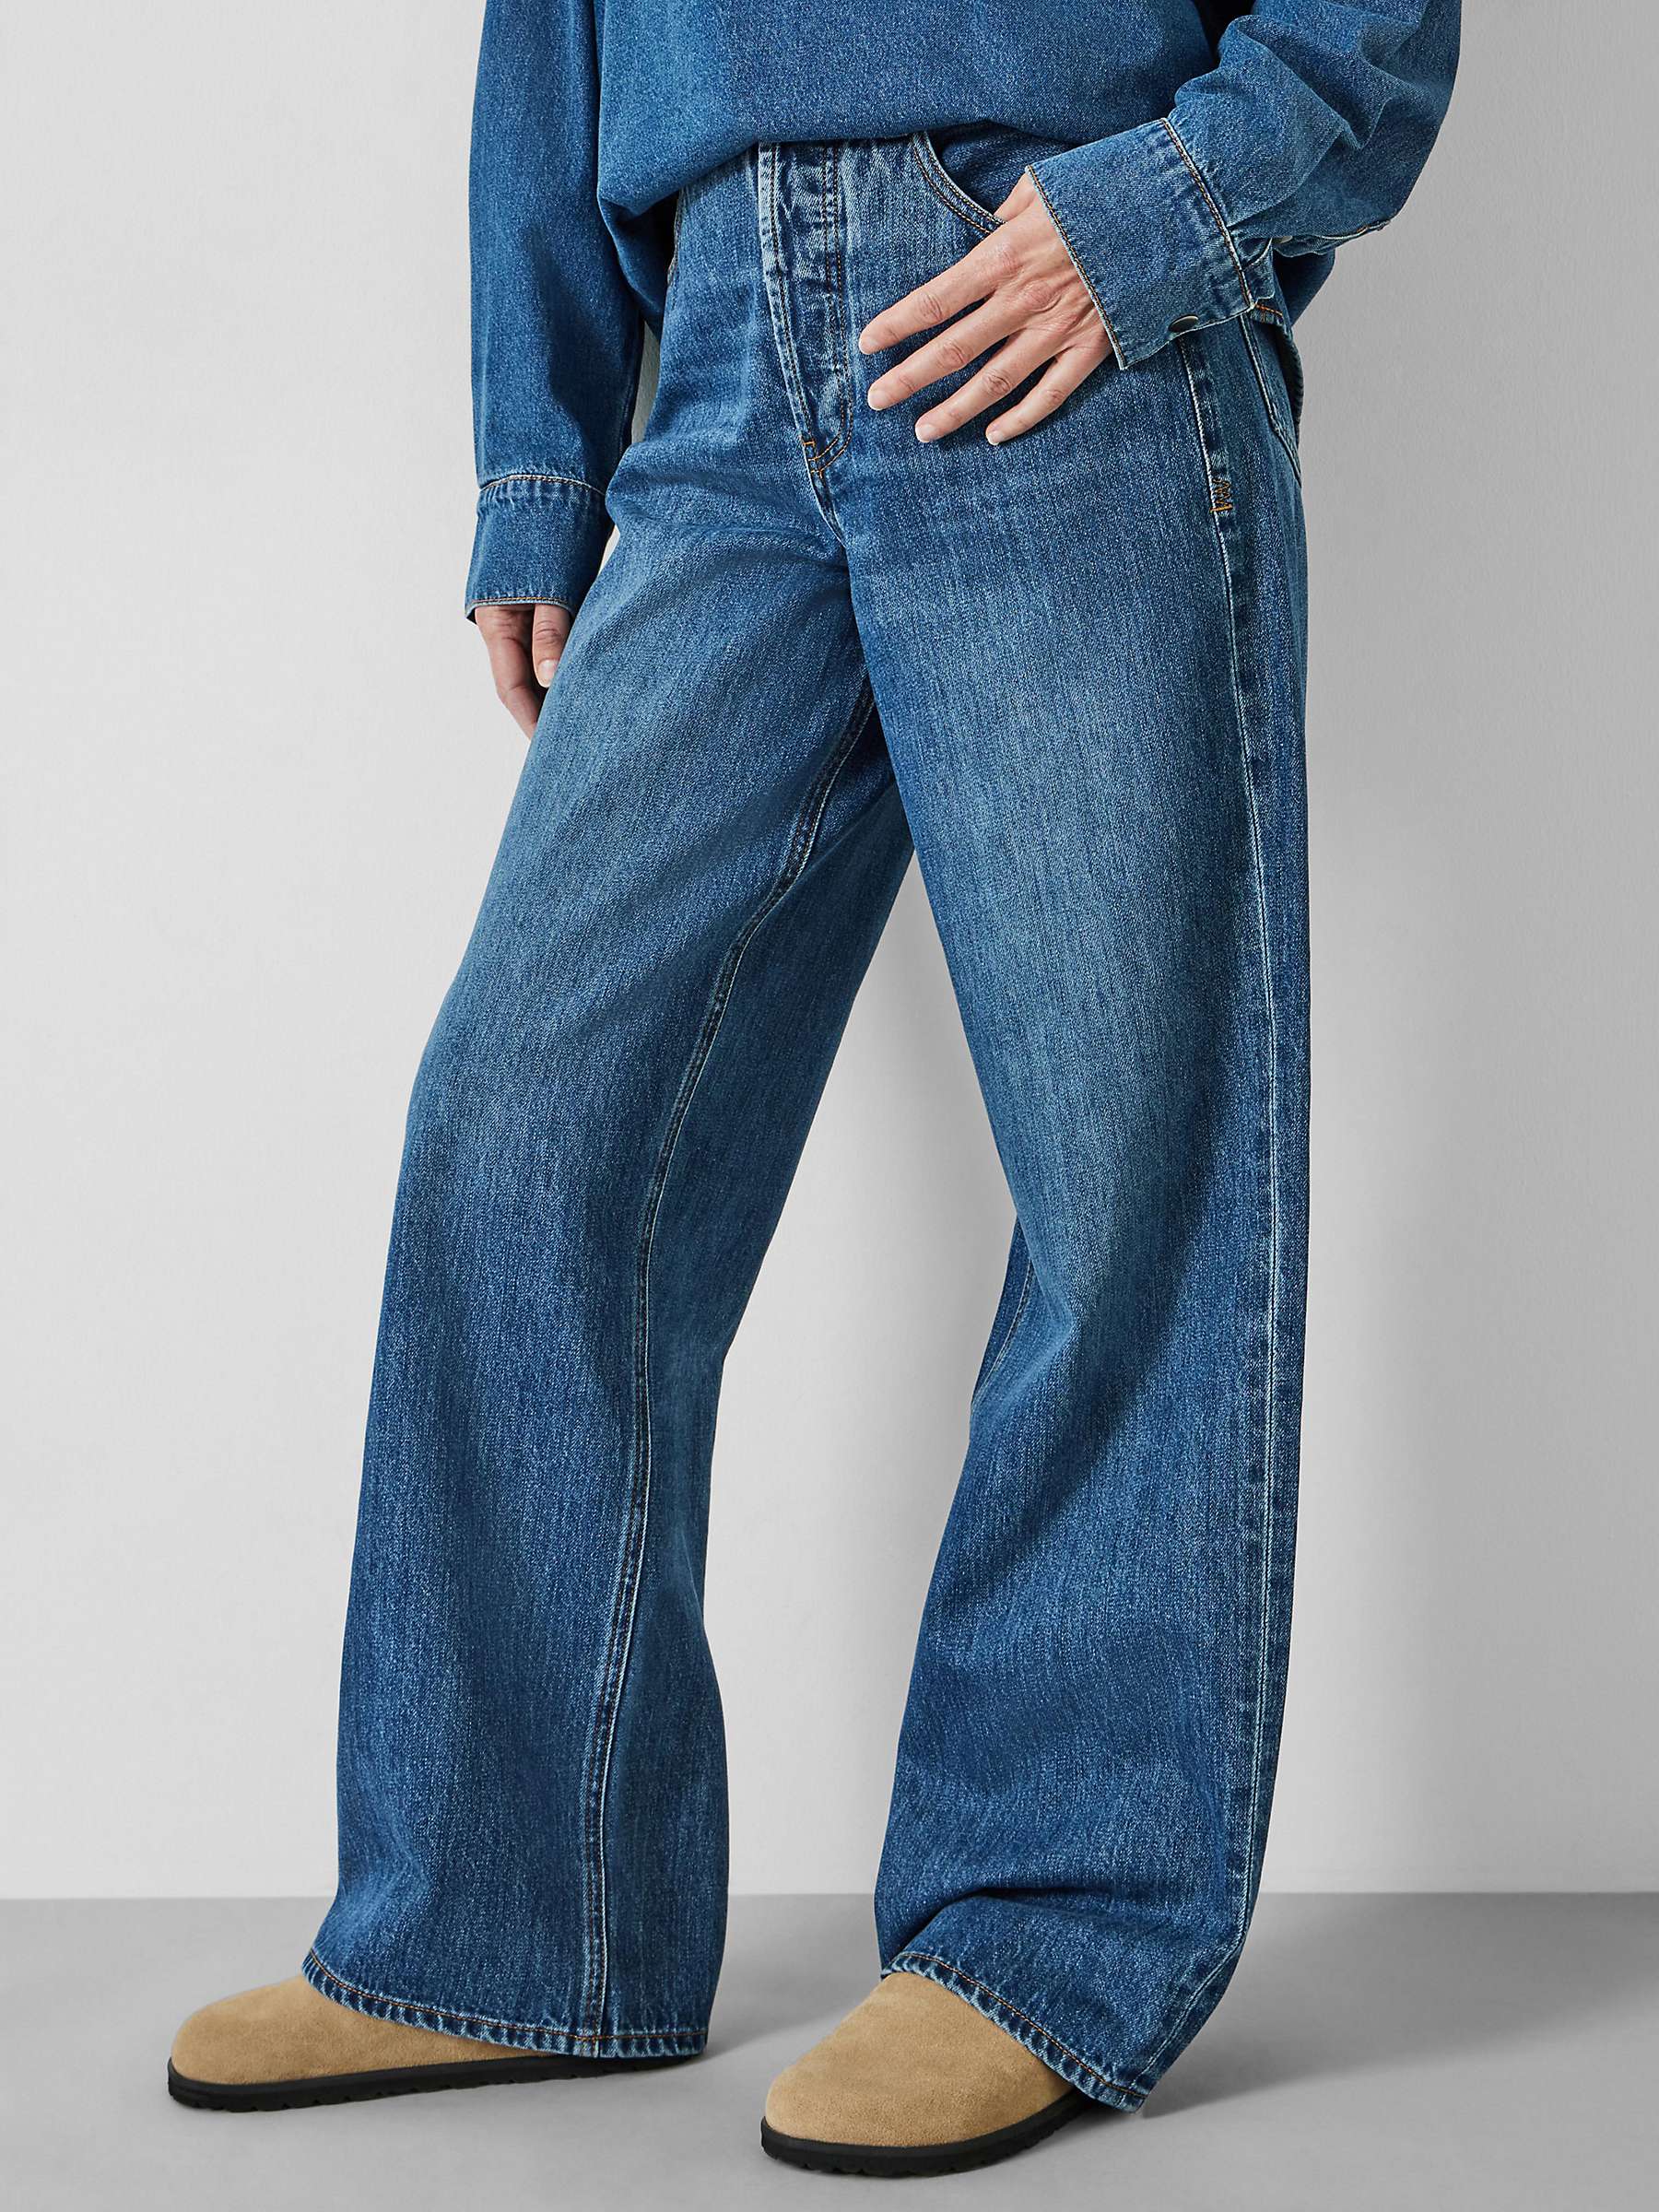 Buy HUSH Katie Baggy Straight Jeans, Mid Authentic Blue Online at johnlewis.com